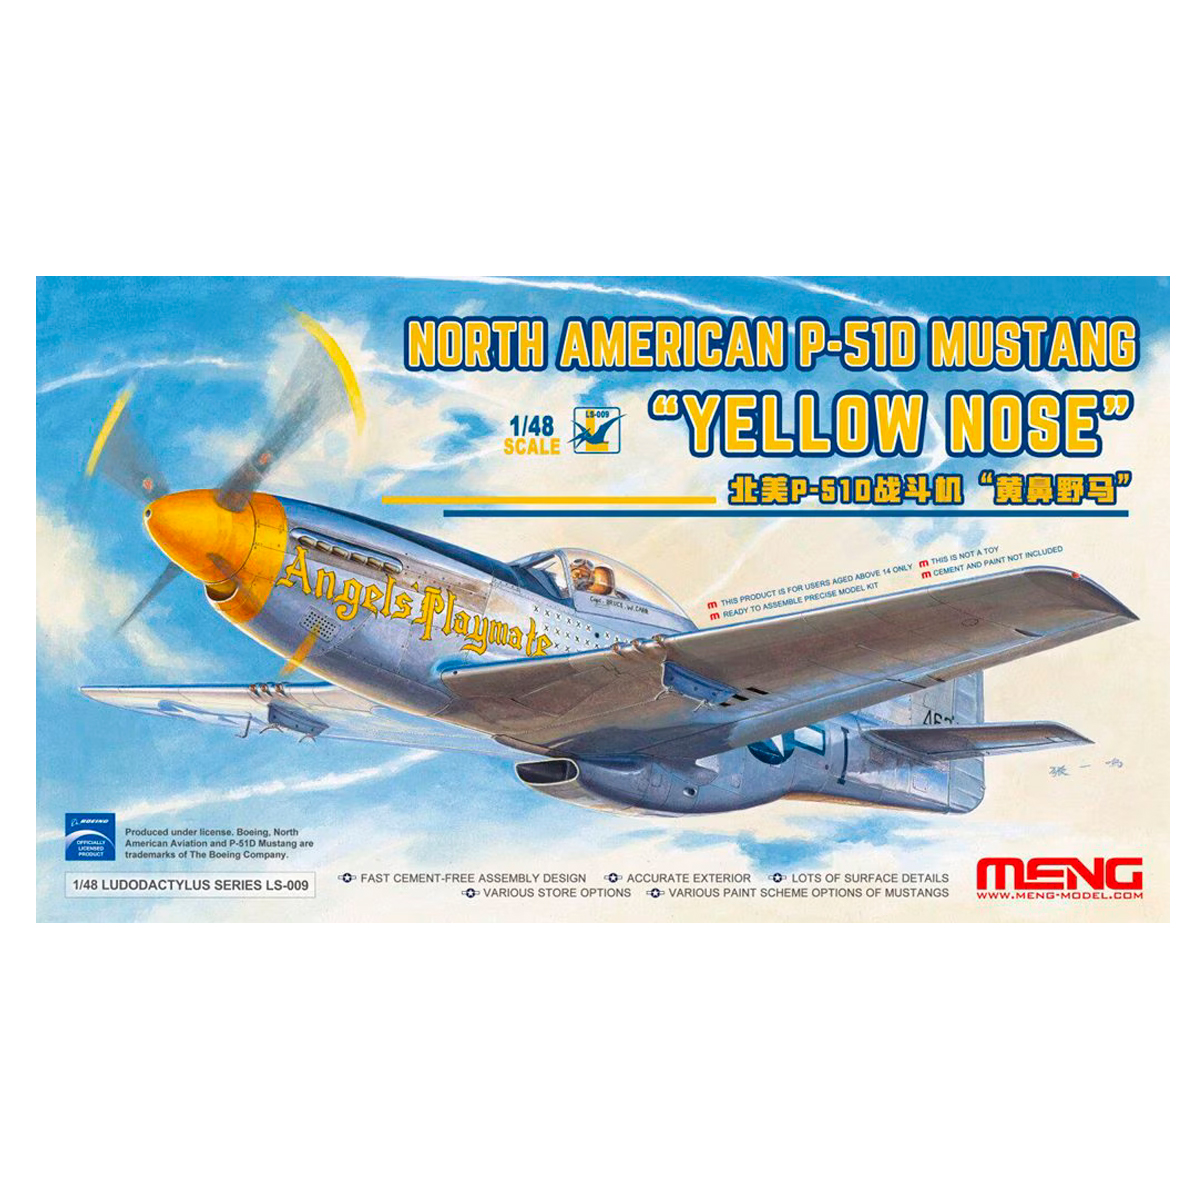 NORTH AMERICAN P-51D MUSTANG «YELLOW NOSE»